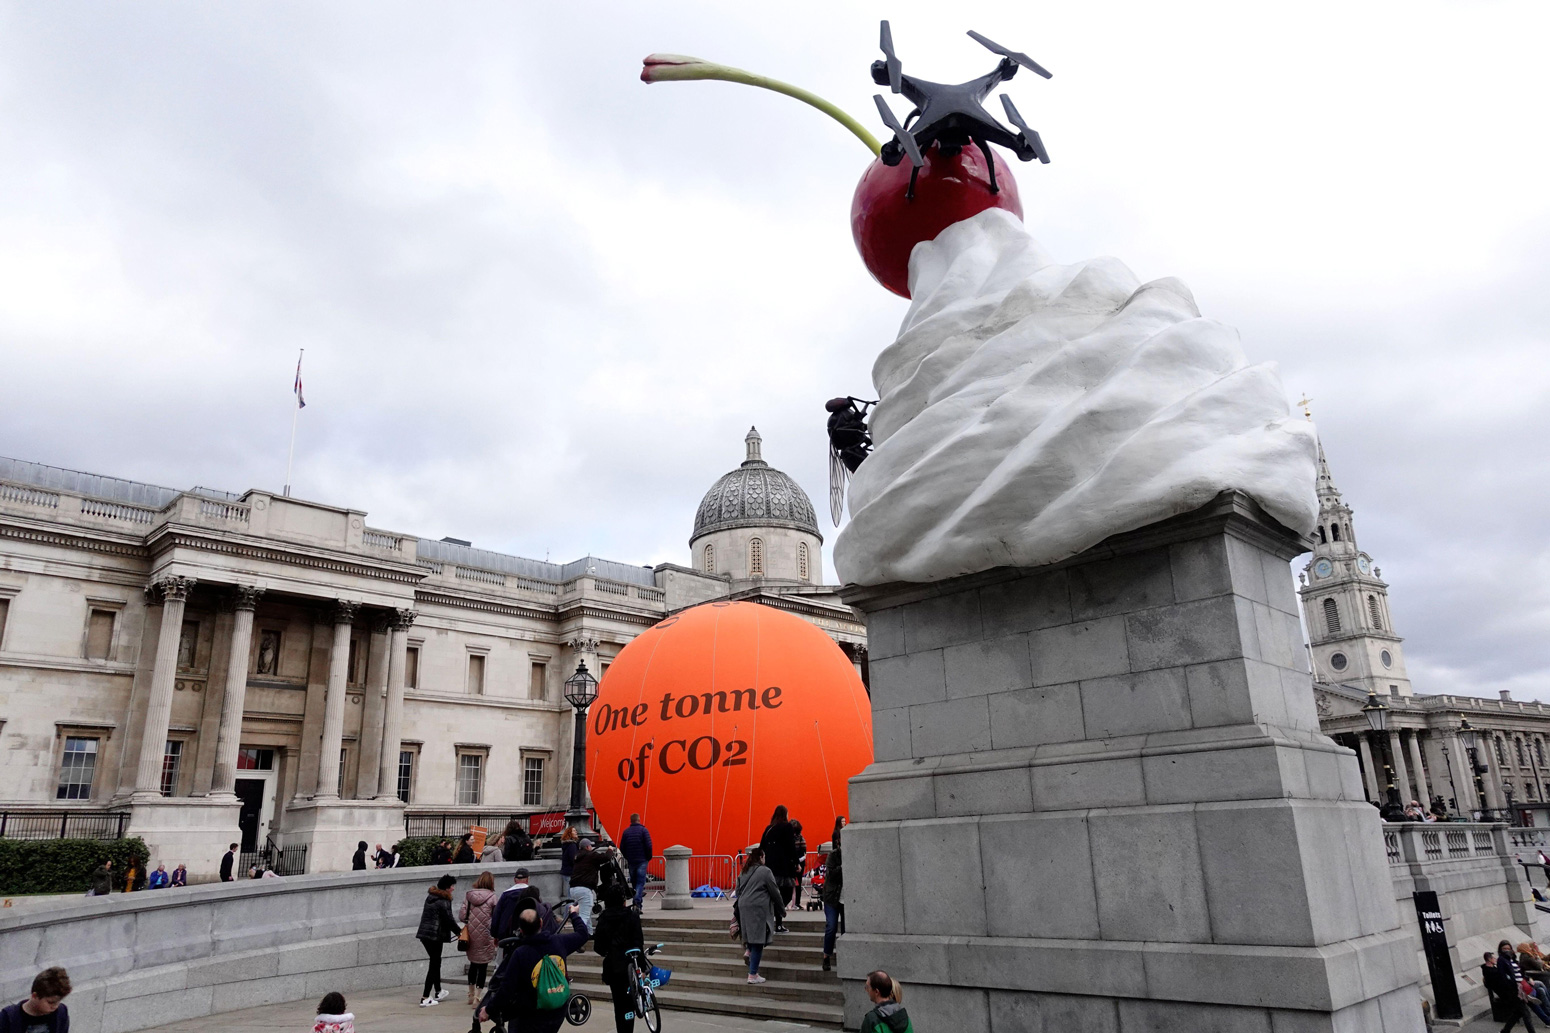 Giant-Carbon-Bubble-in-Trafalgar-Square-ahead-2H3GJM8-of-the-COP26-meeting-in-Glasgow-on-1-November-2021